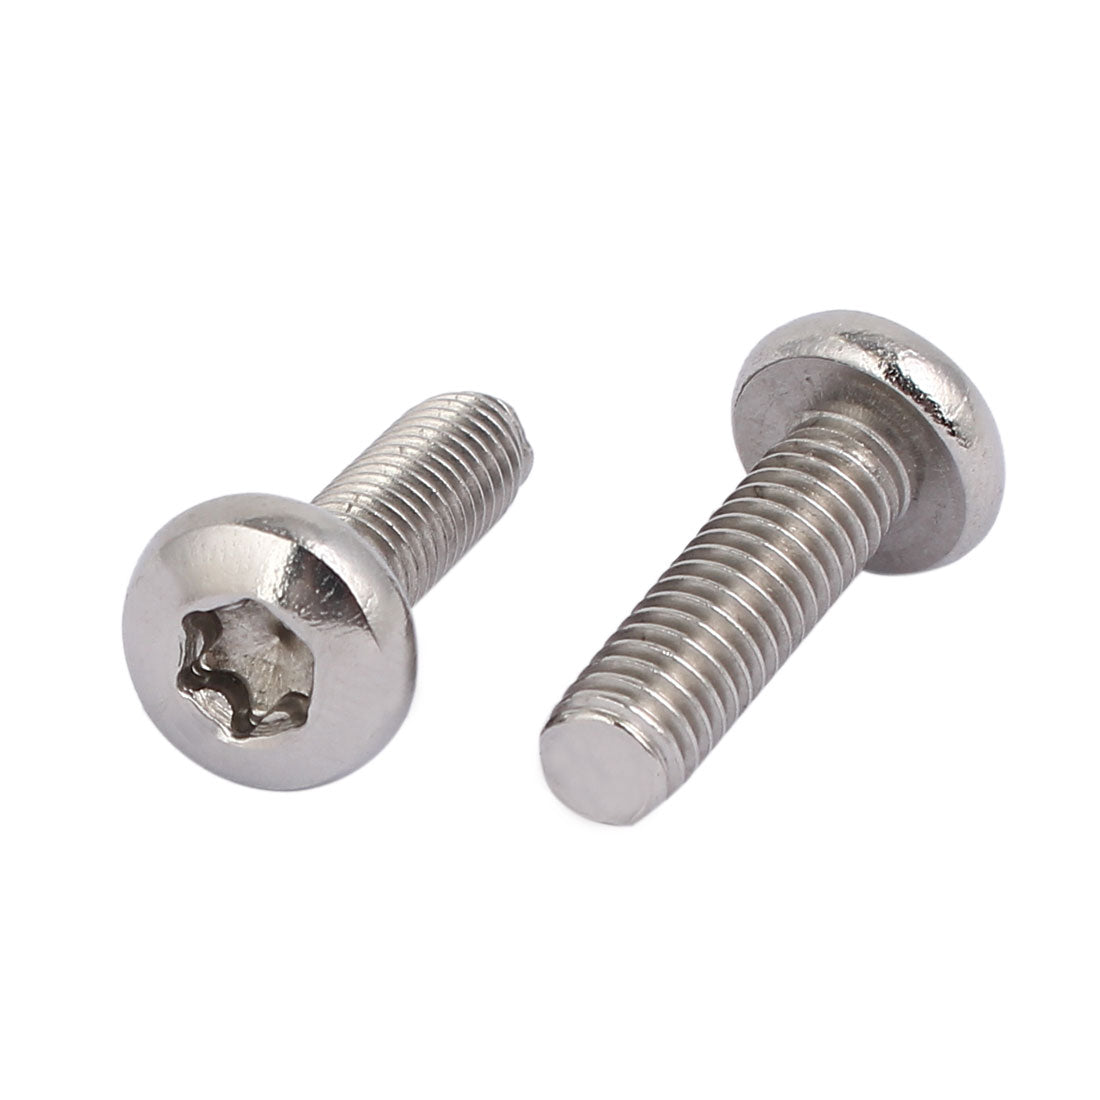 uxcell Uxcell M6x20mm 304 Stainless Steel Button Head Torx Socket Cap Screws Fasteners 25pcs